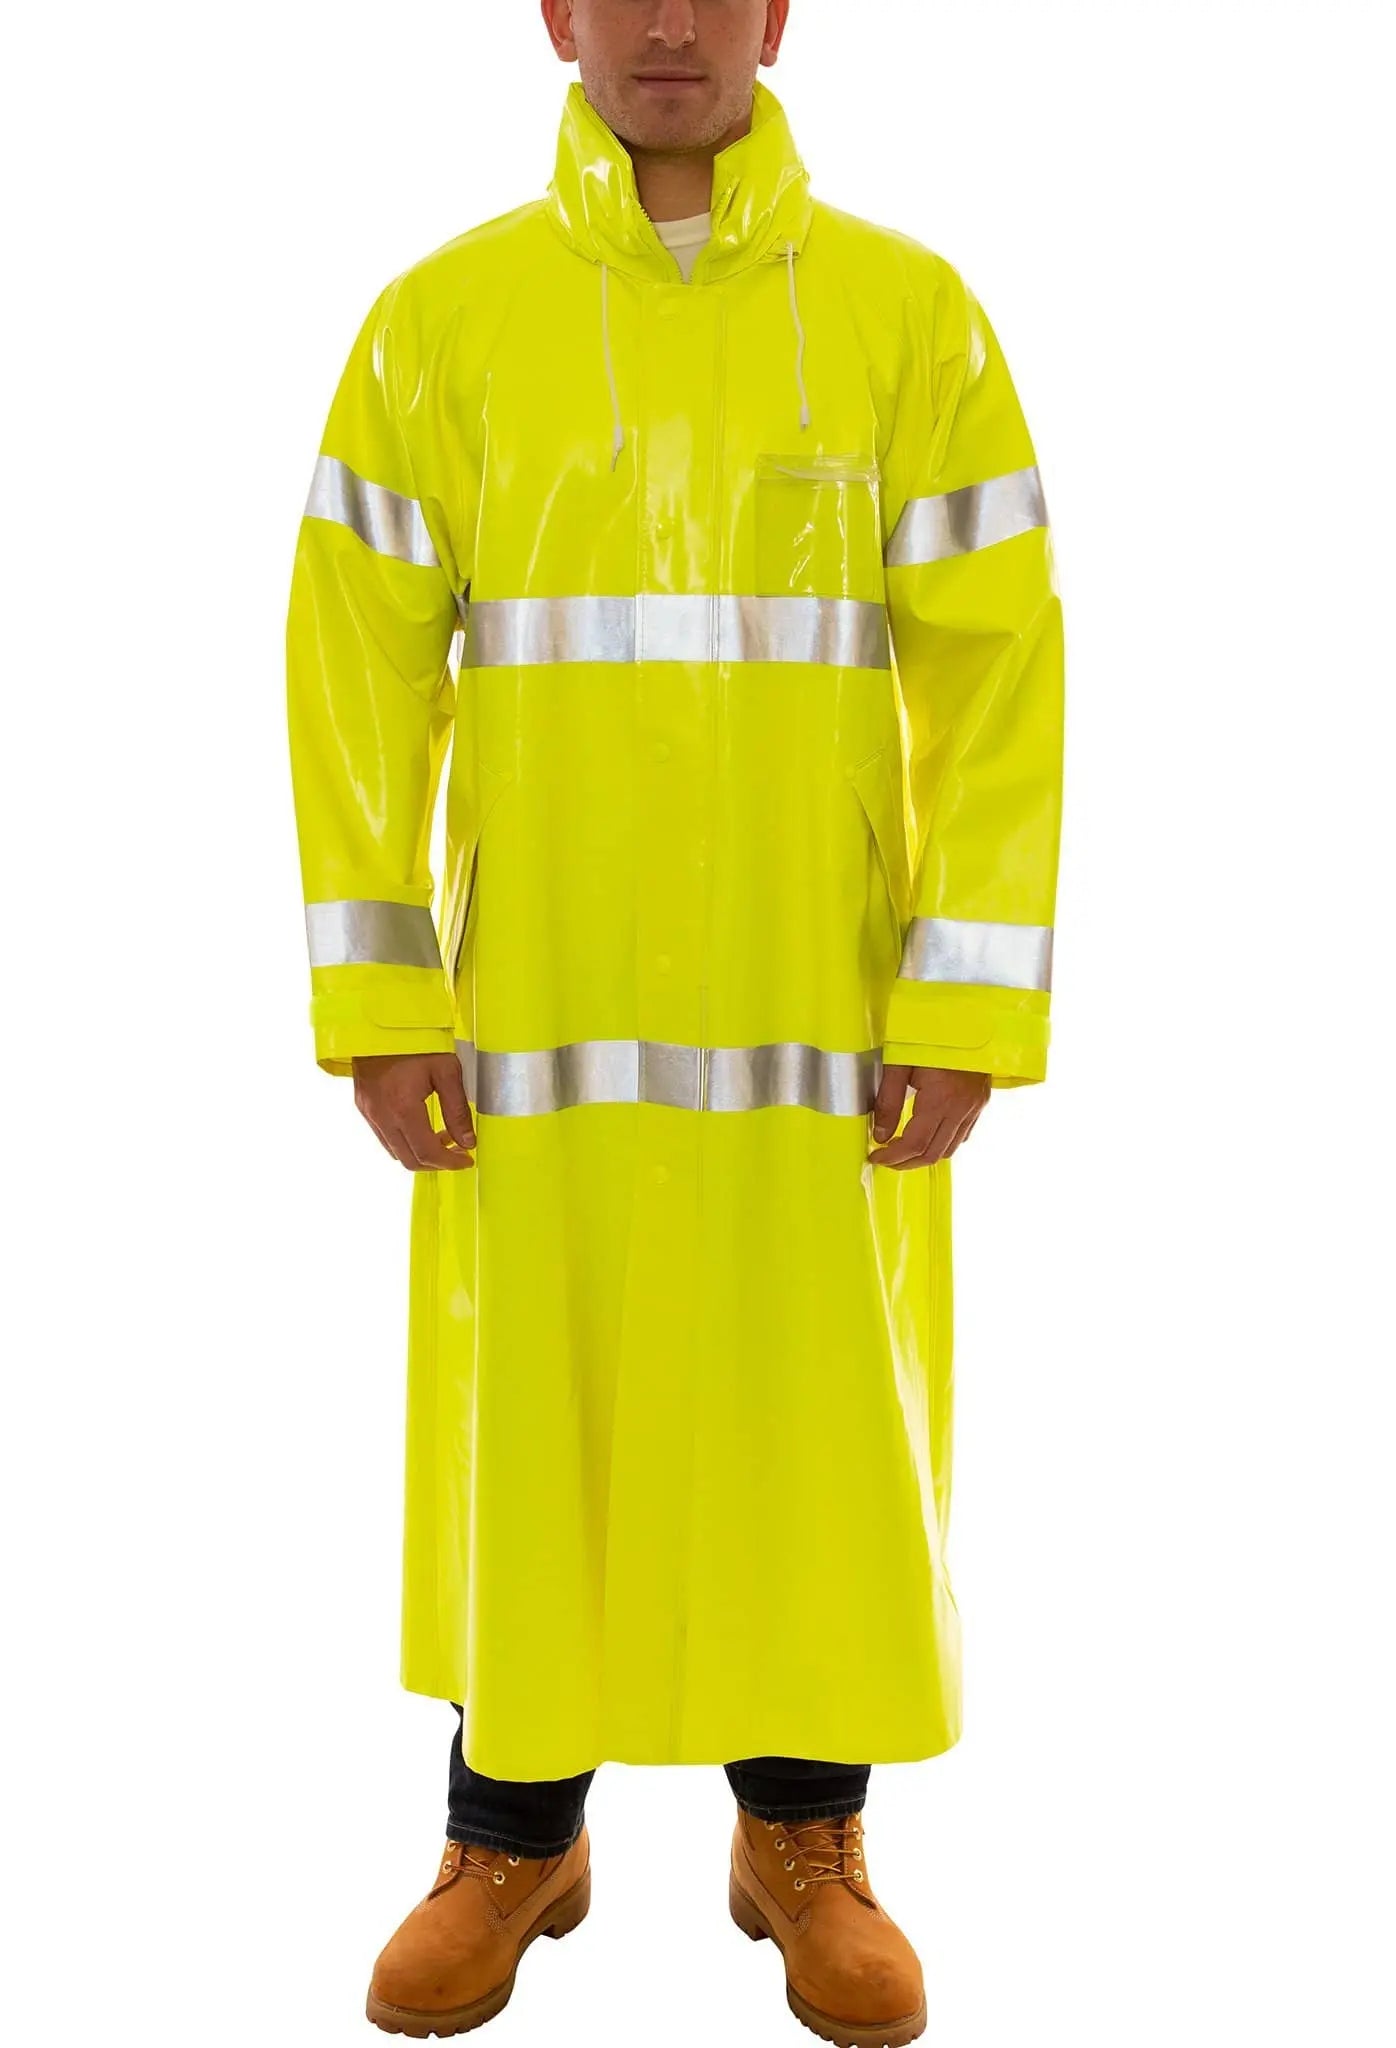 TINGLEY - Comfort-Brite - FR Yellow-Green Coat w/ Hood - ANSI 107 Class 3  Becker Safety and Supply